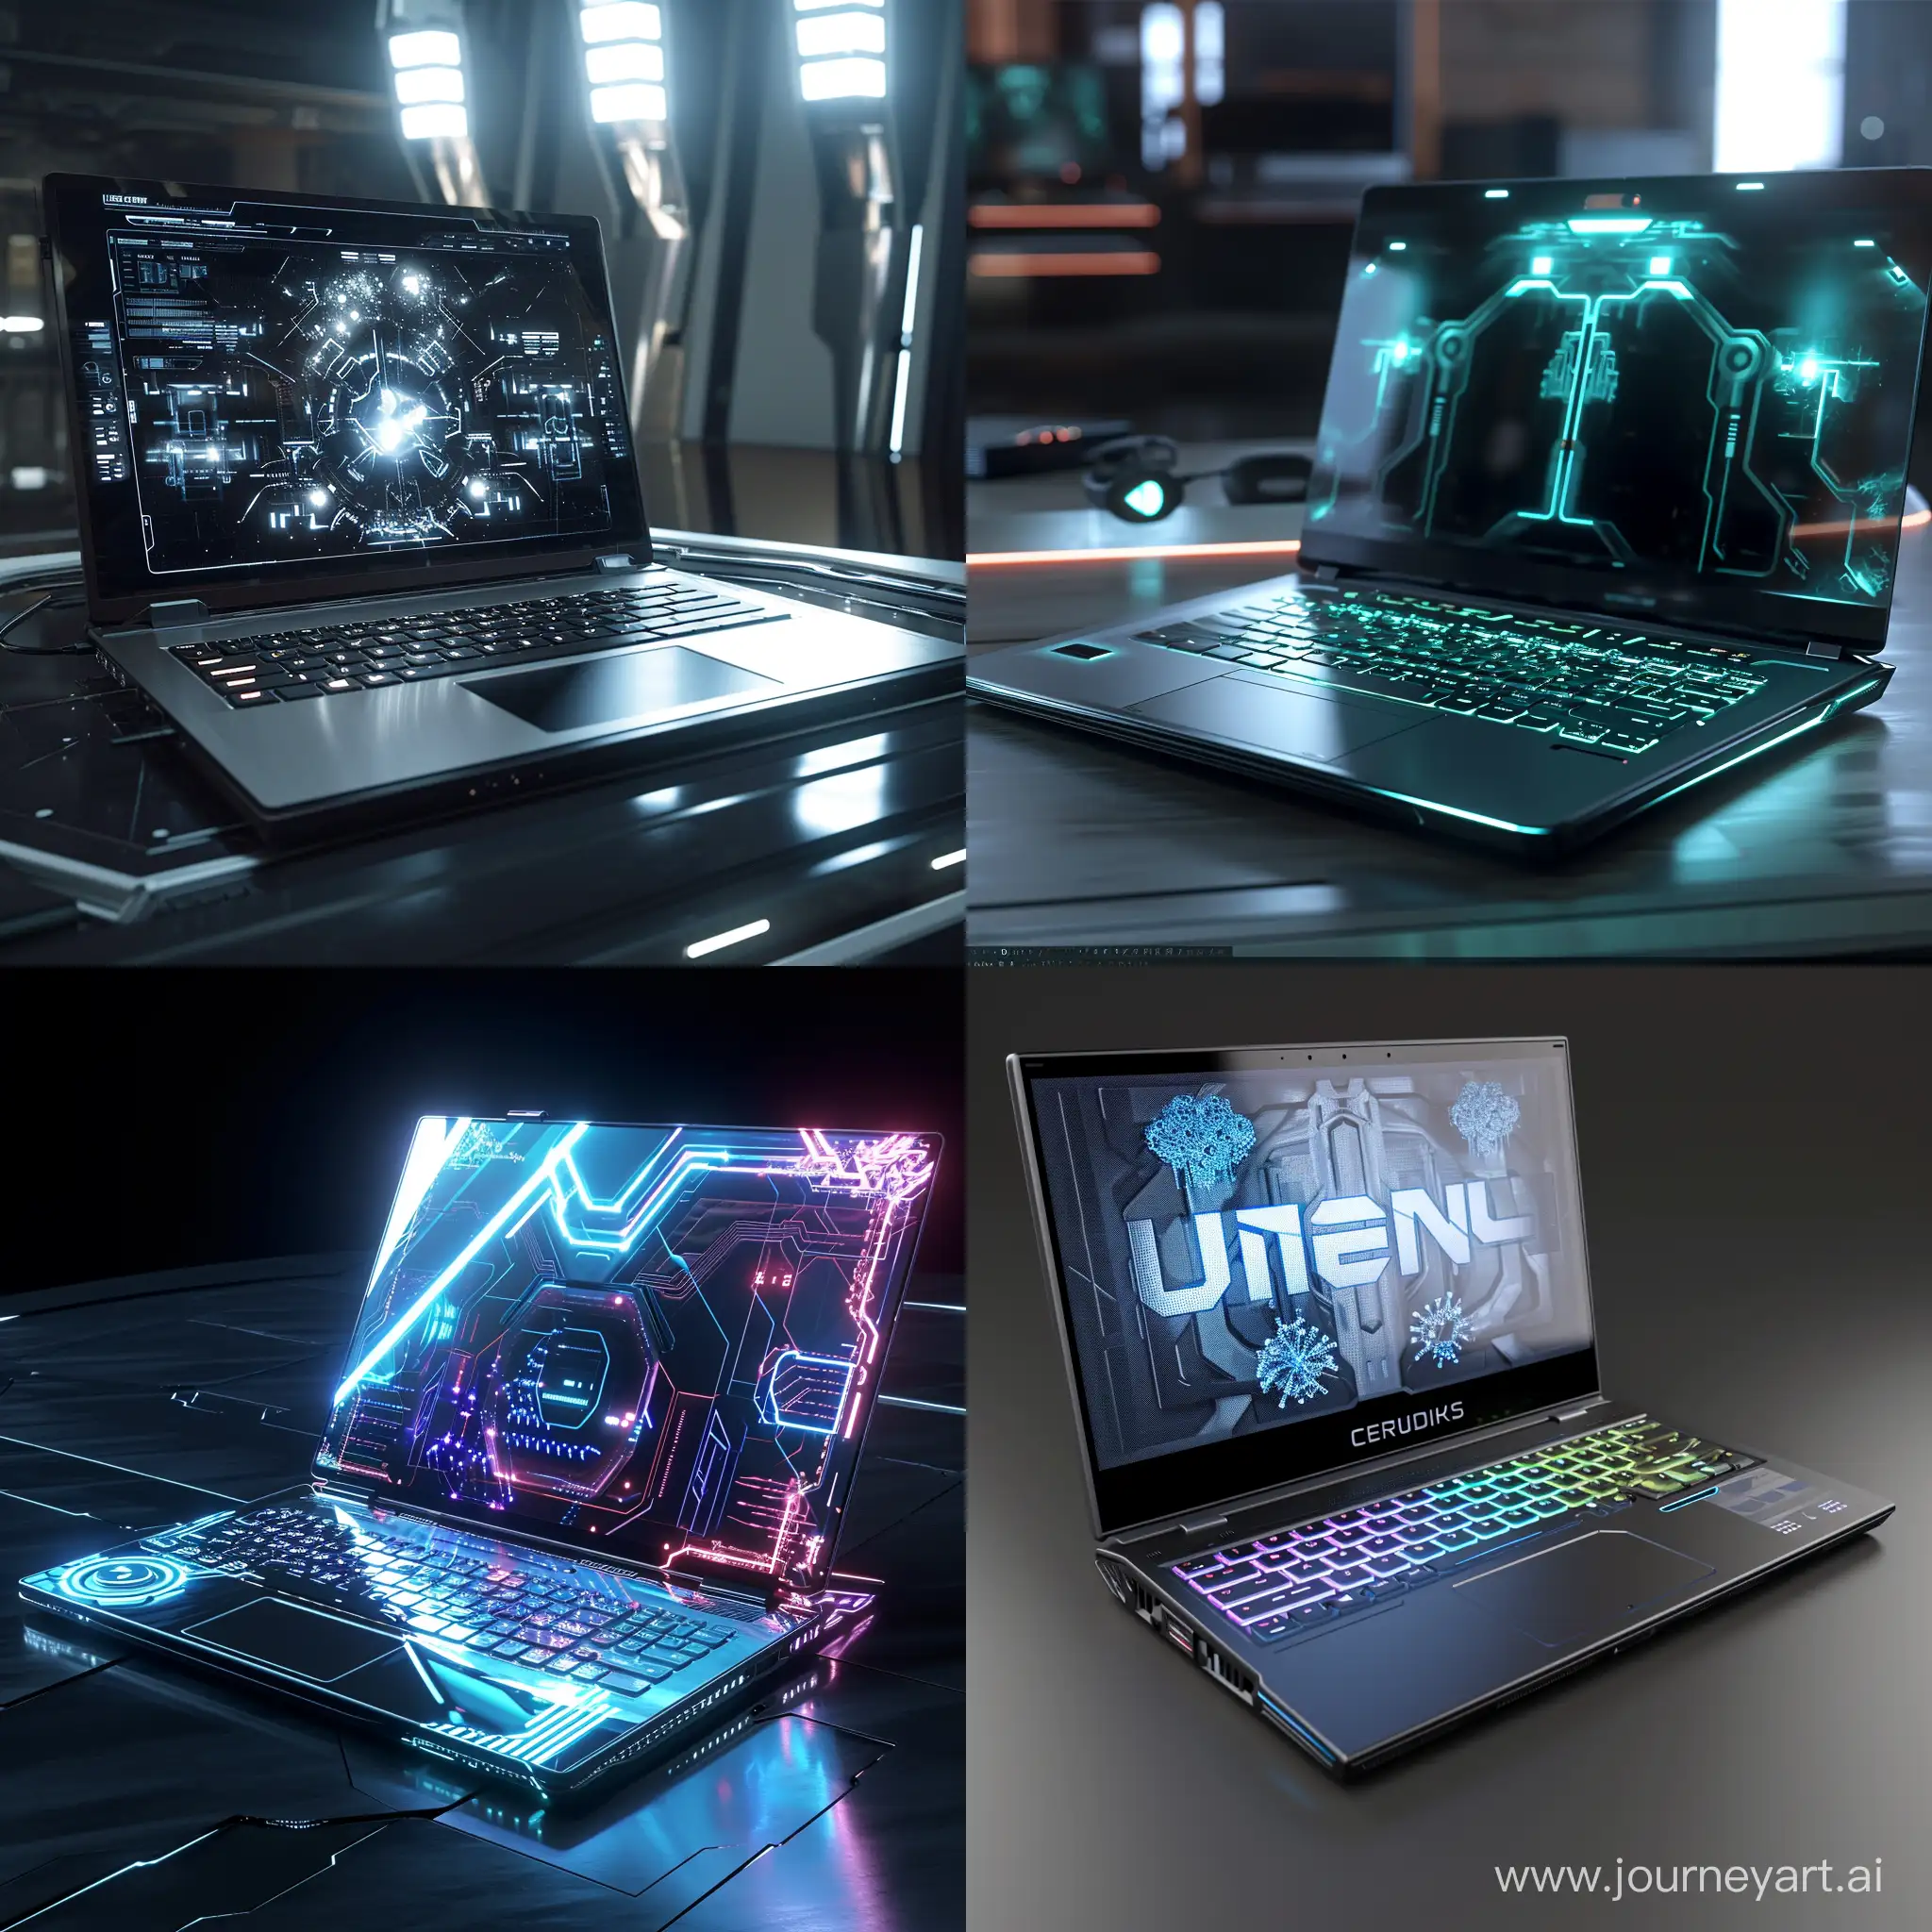 Futuristic-Laptop-with-Unreal-Engine-5-and-Nanotechnology-in-HighTech-Science-Fiction-Setting